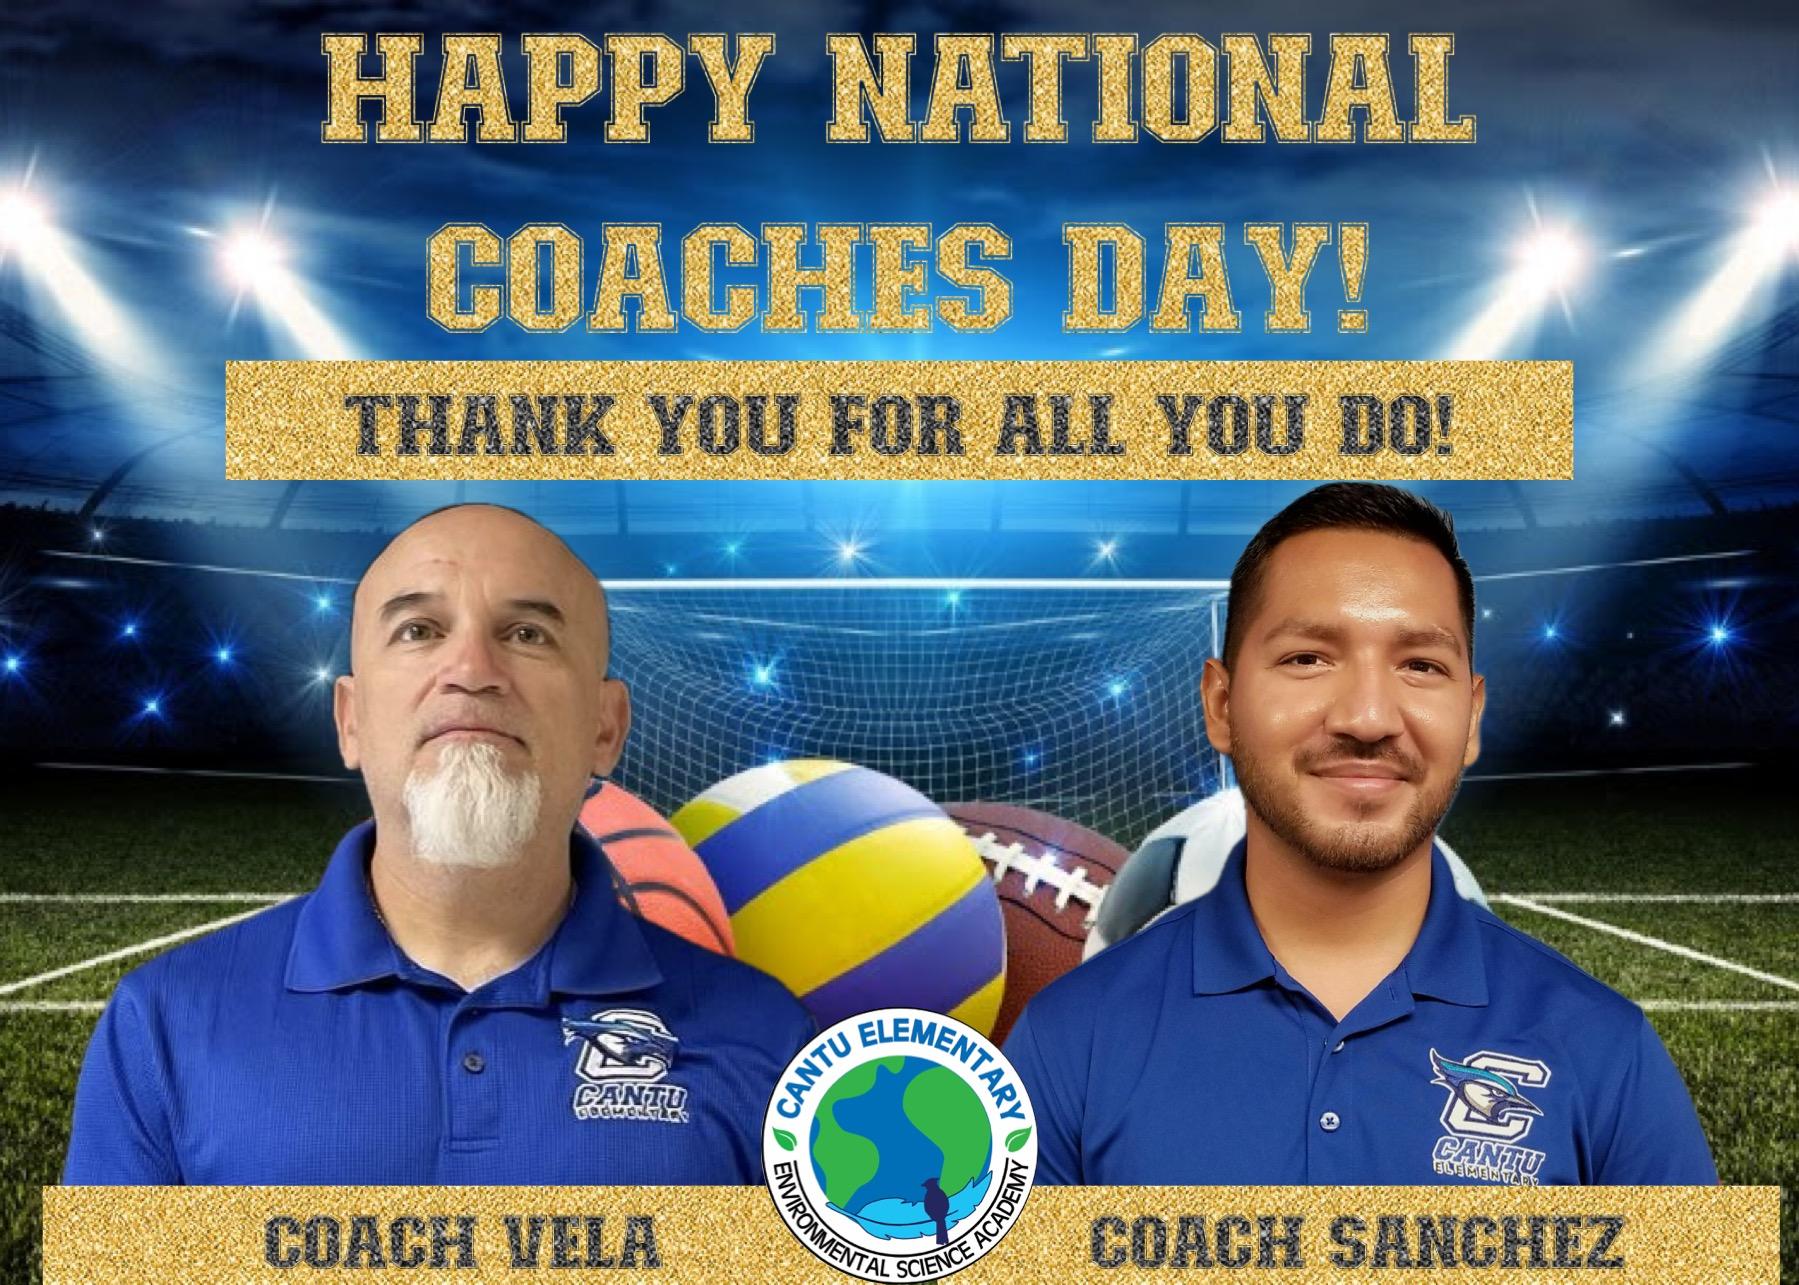 National Coaches day